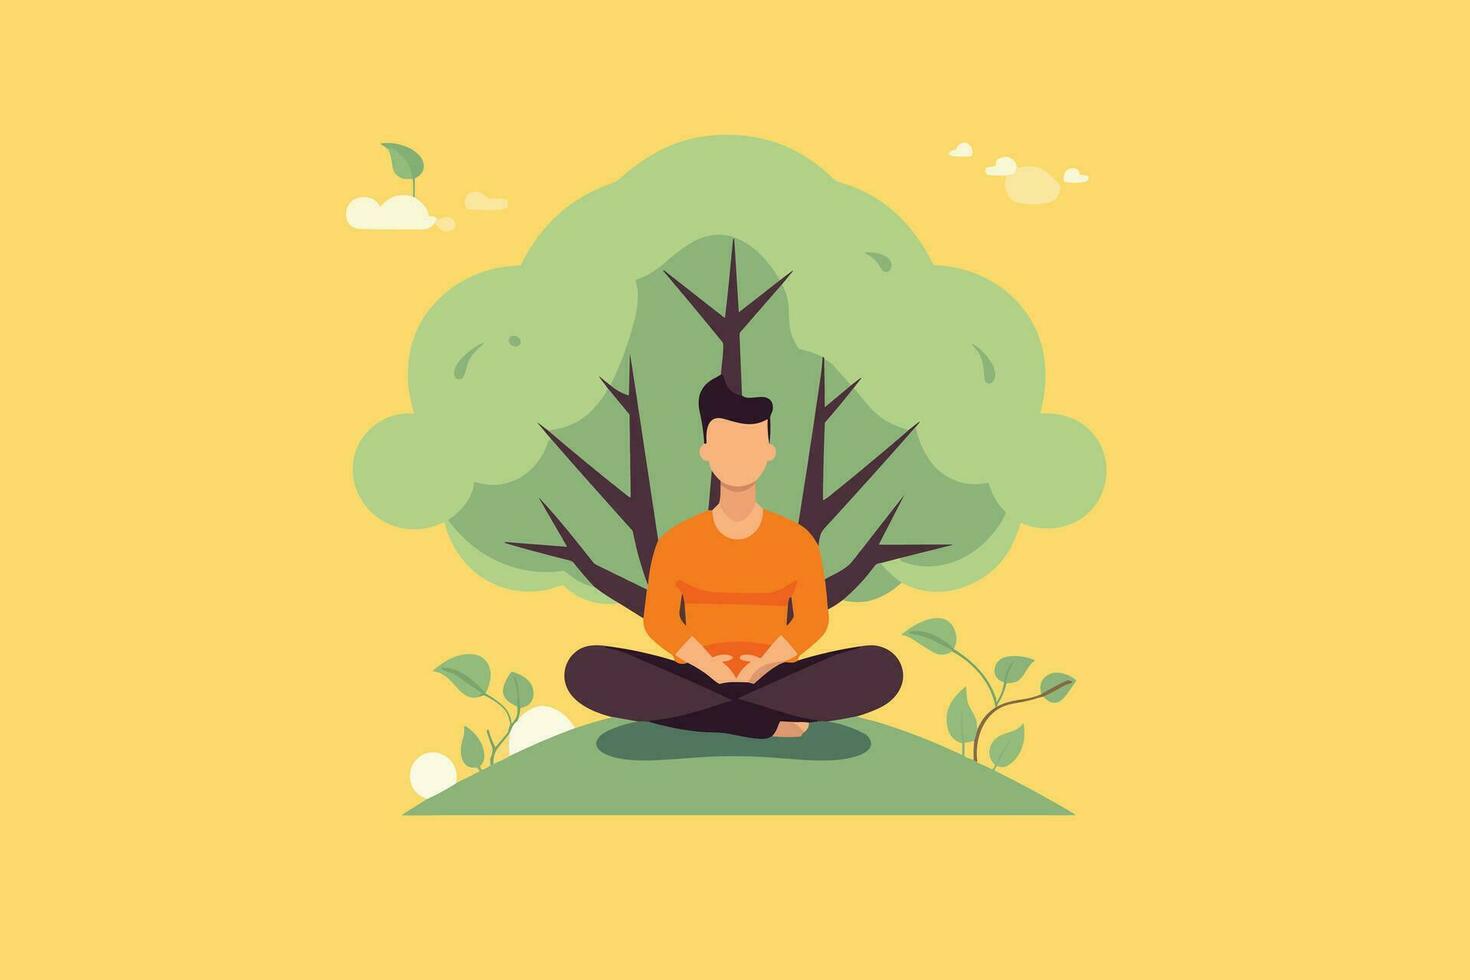 a person doing yoga under the tree vector illustration